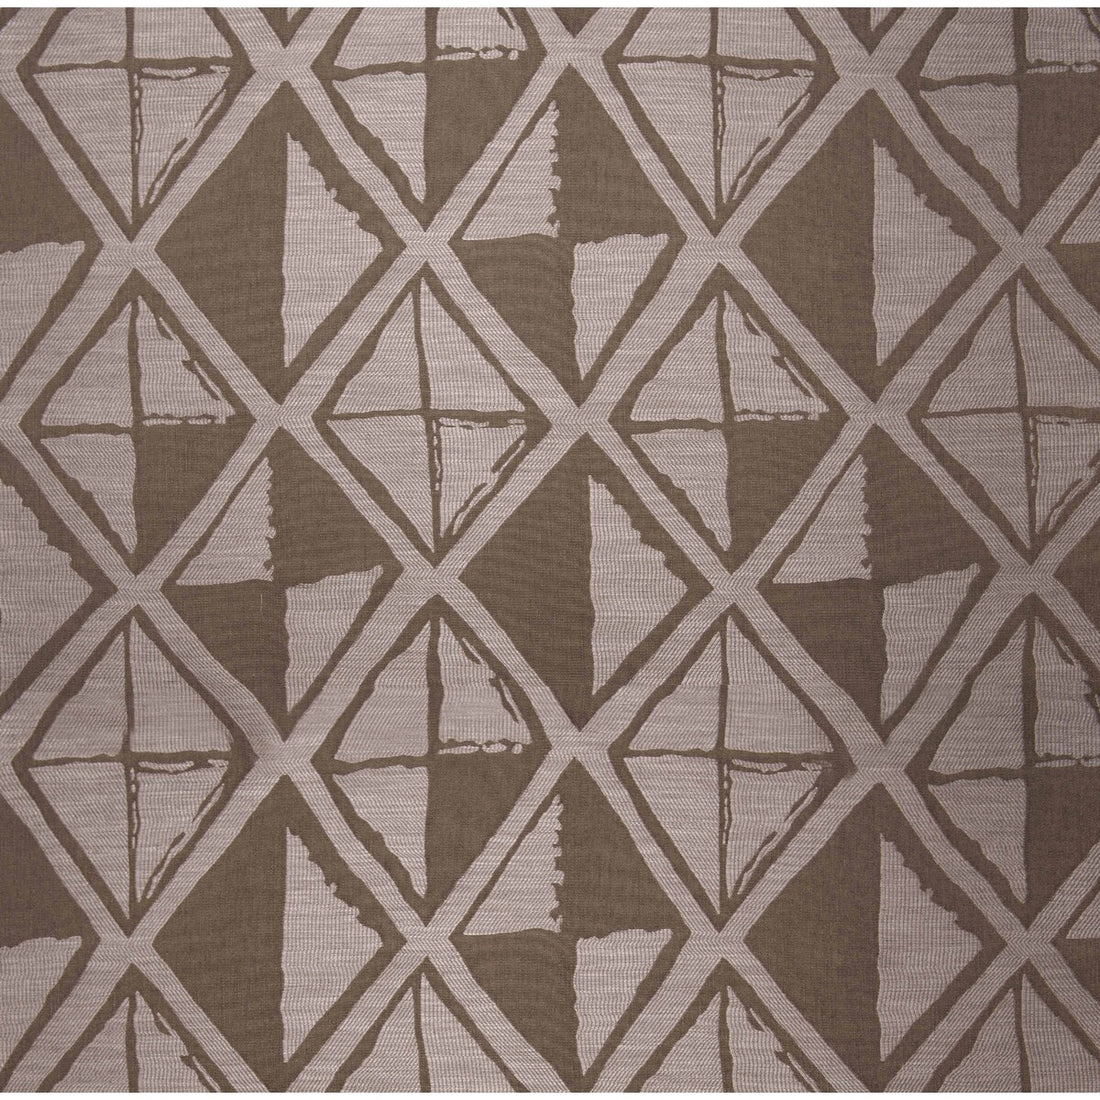 Namibia fabric in marron color - pattern GDT5377.1.0 - by Gaston y Daniela in the Gaston Africalia collection